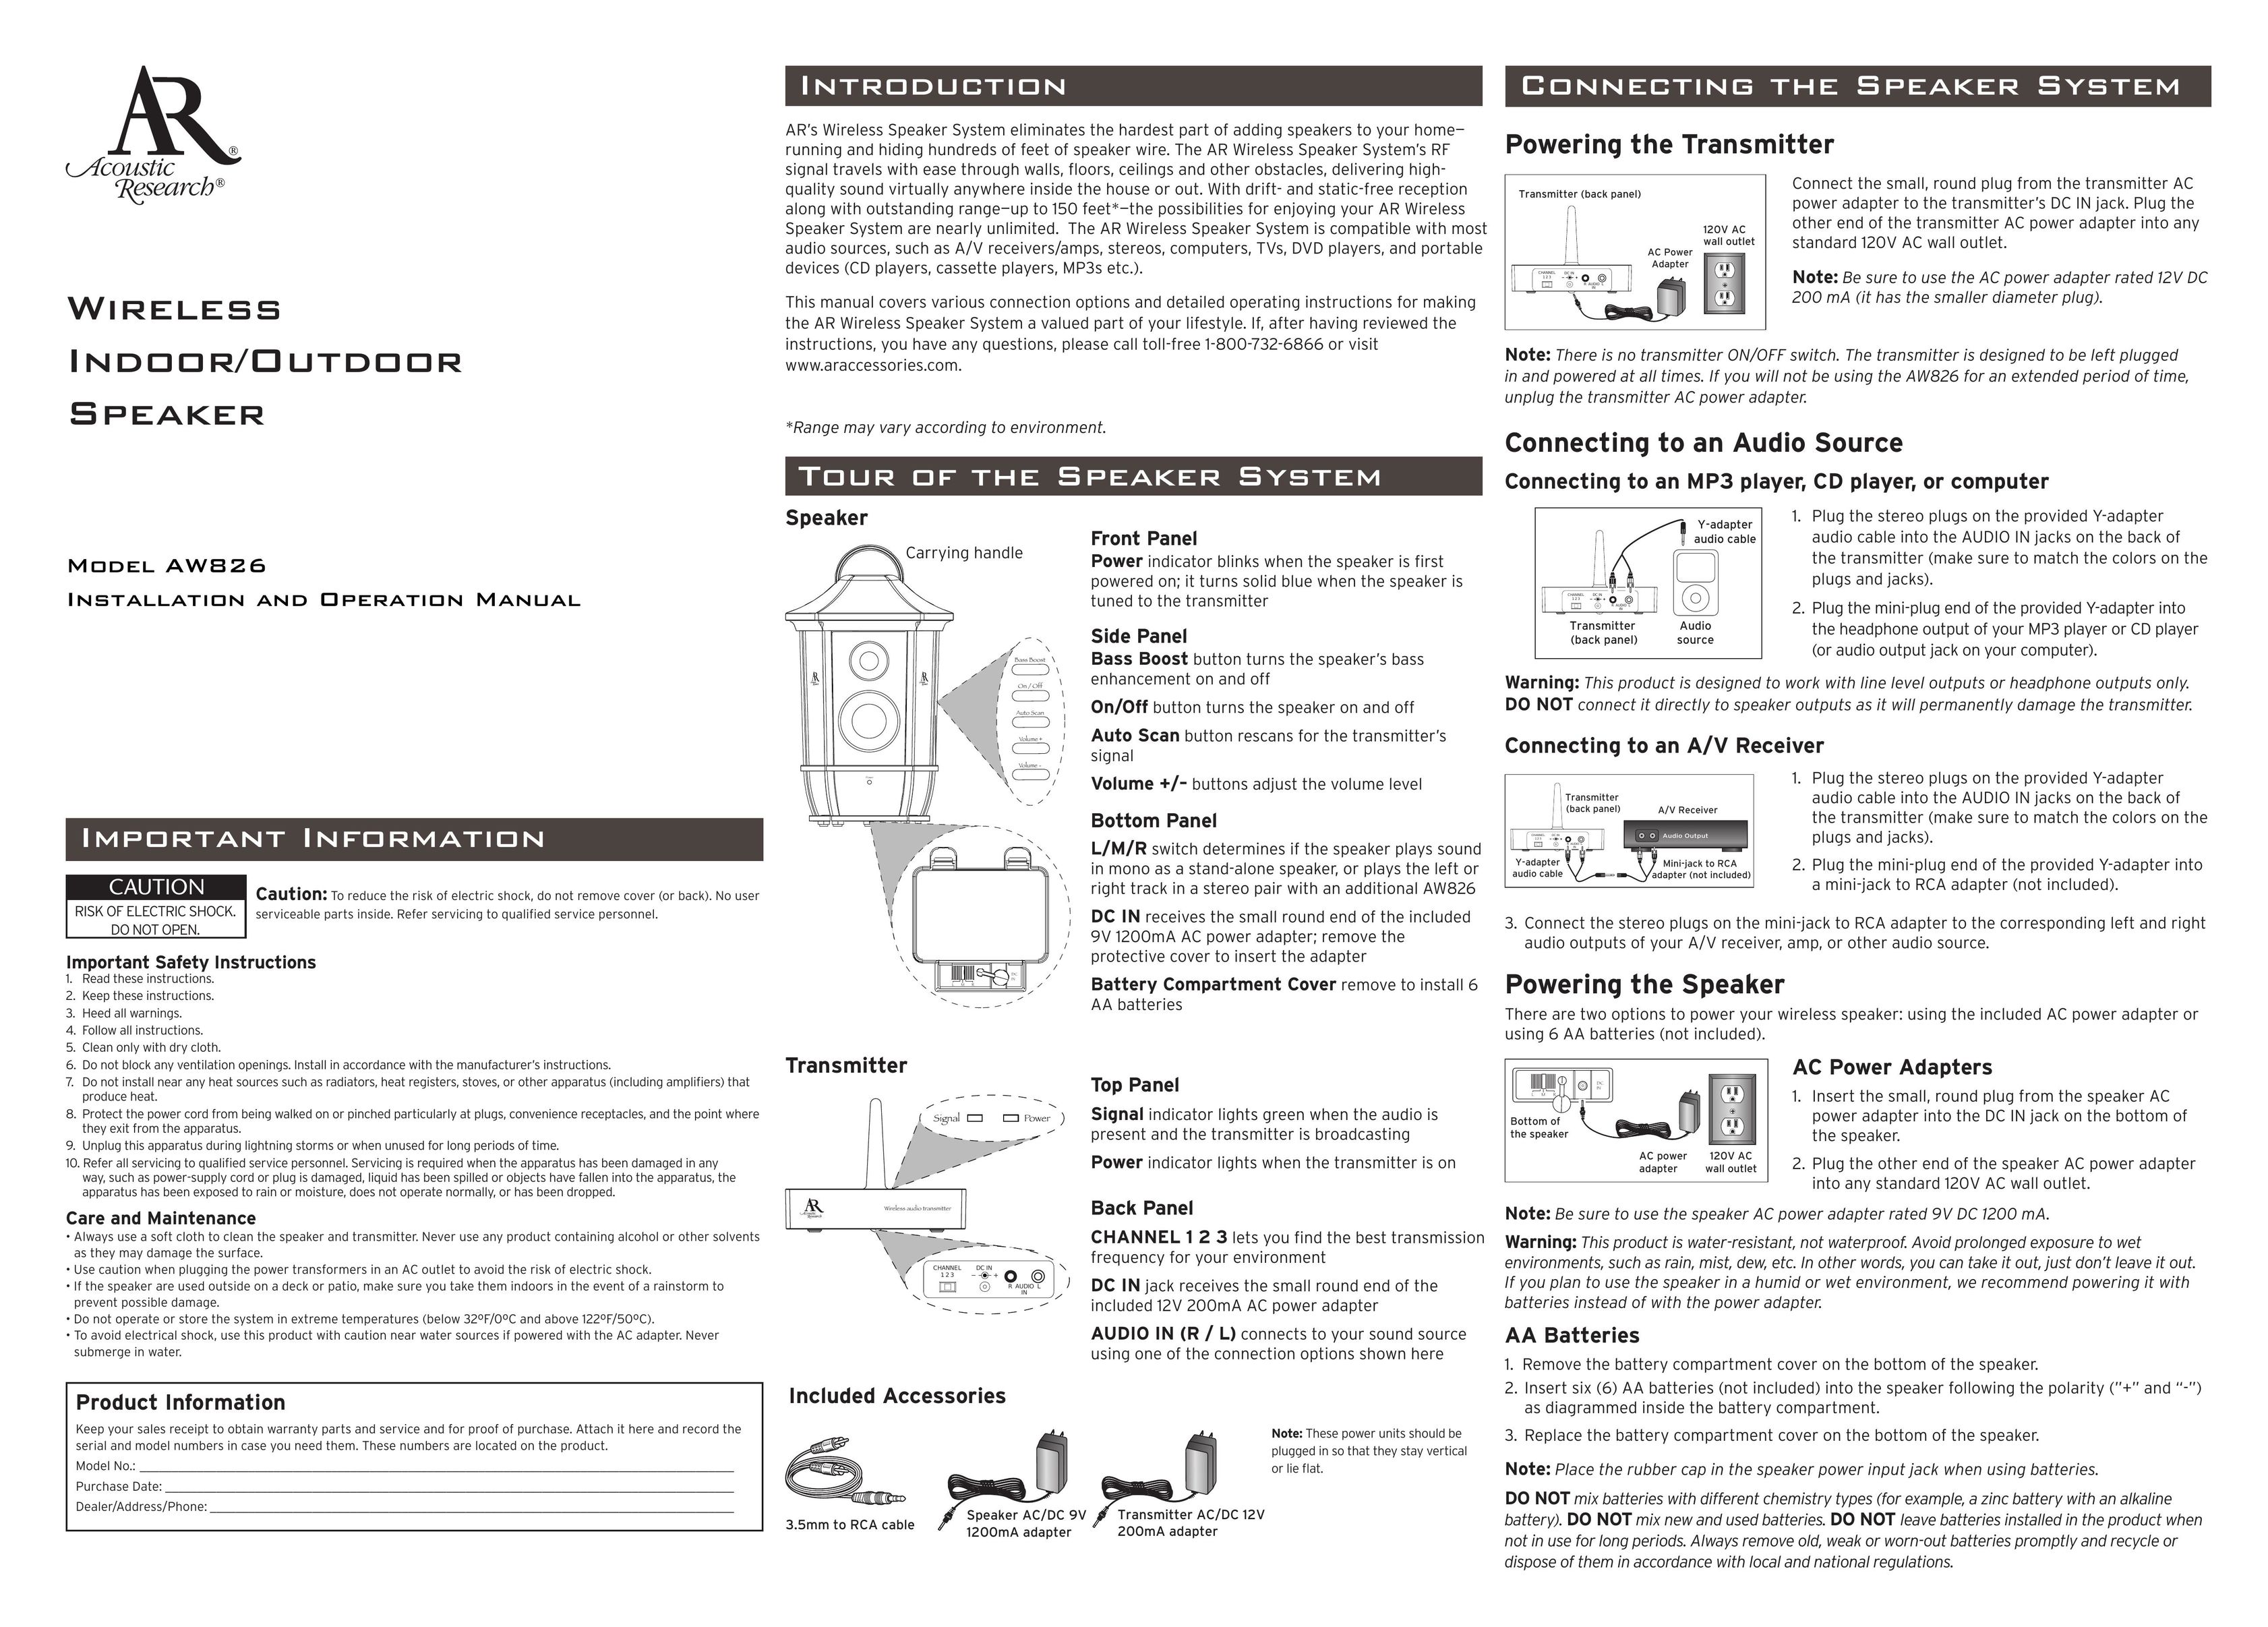 Acoustic Research AW826 Speaker User Manual